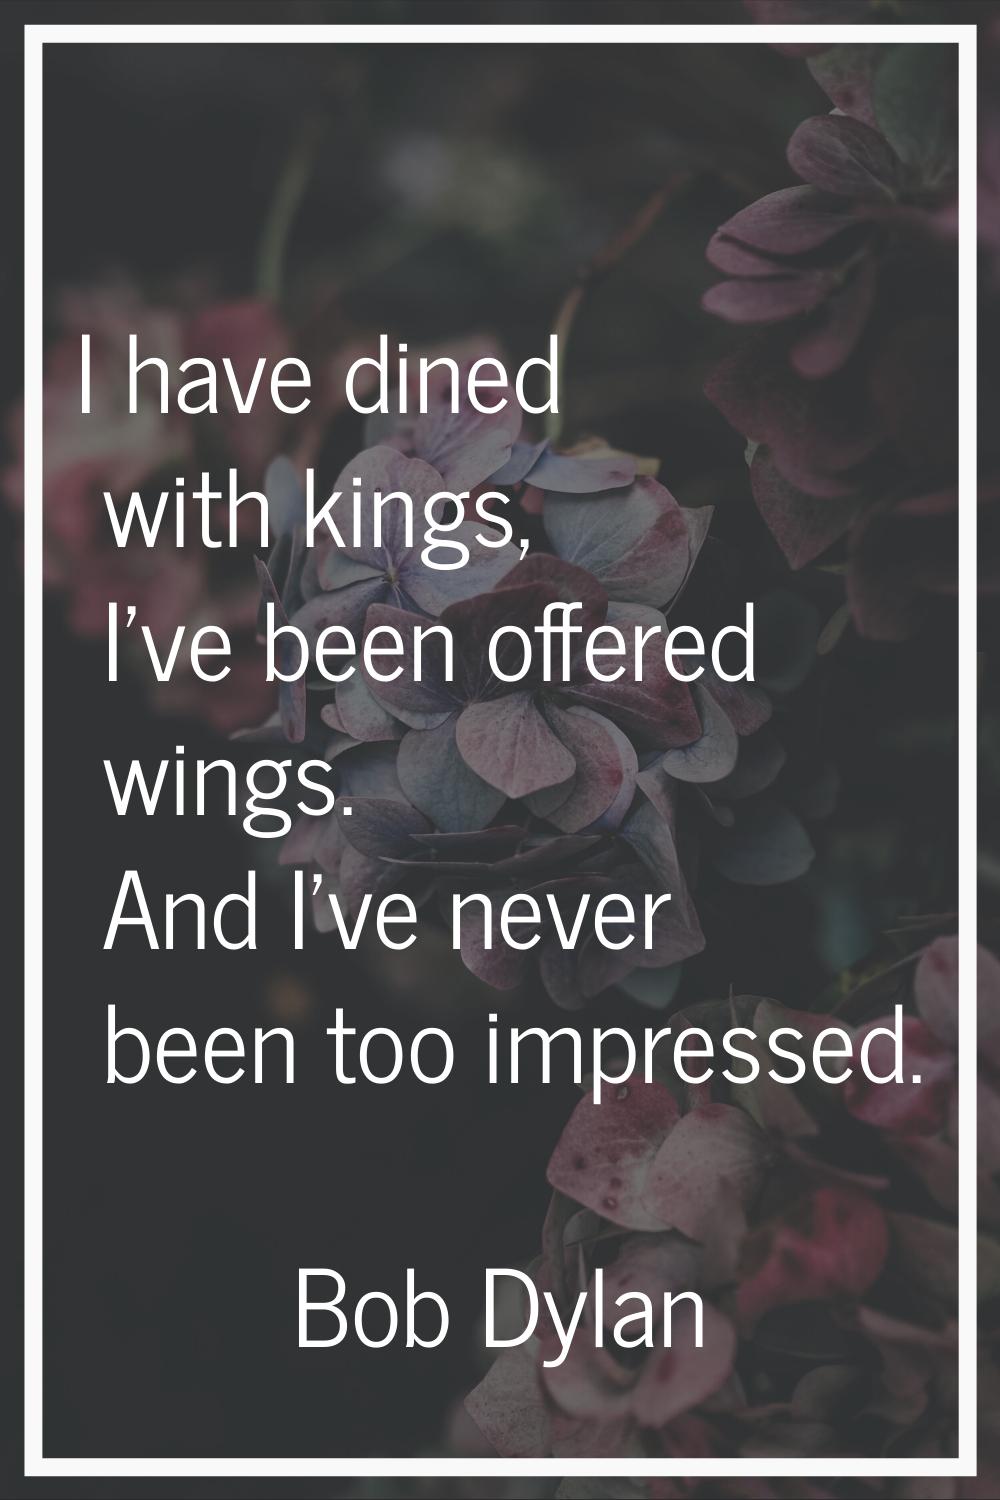 I have dined with kings, I've been offered wings. And I've never been too impressed.